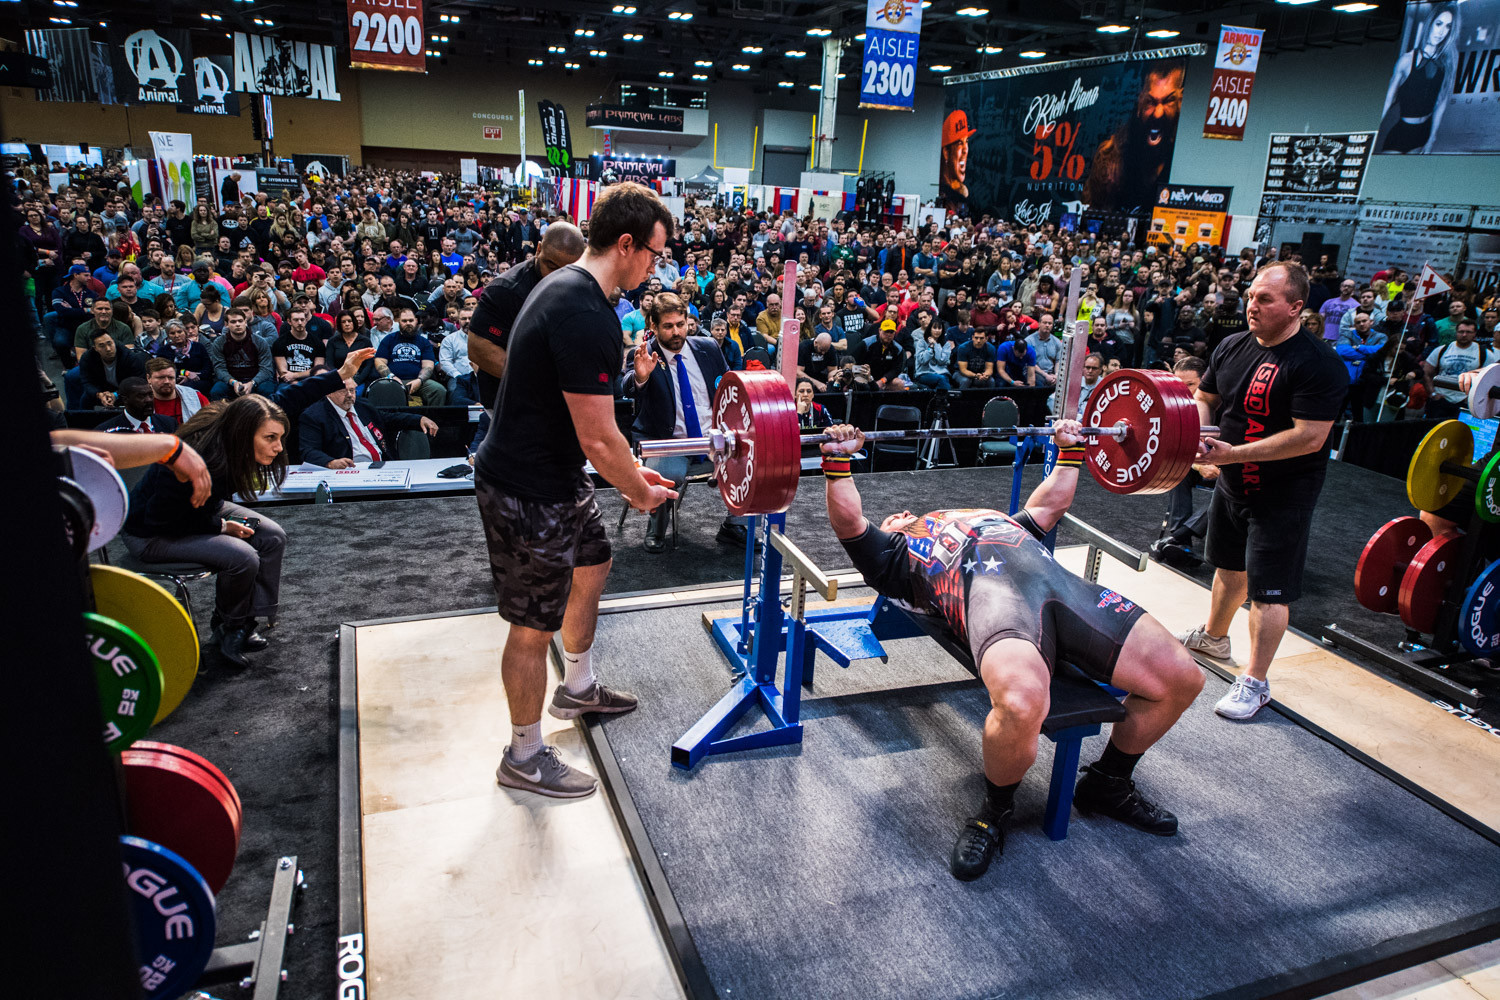 USA Powerlifting has 20,000 registered members and is the sport's dominant country ©USAPL